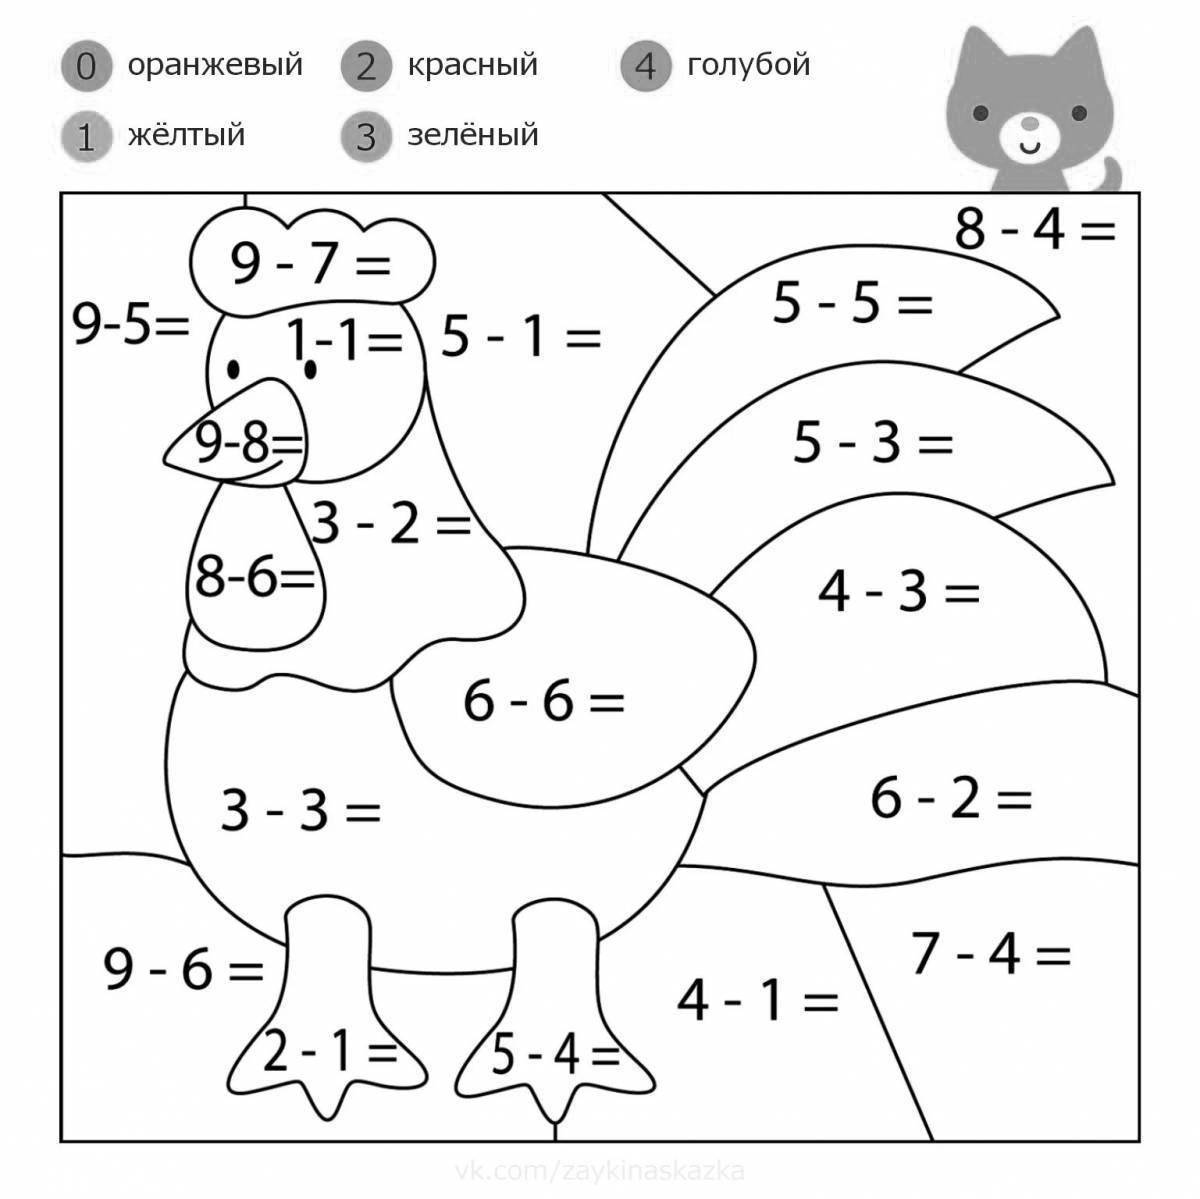 An interesting math coloring book for kids 6-7 years old